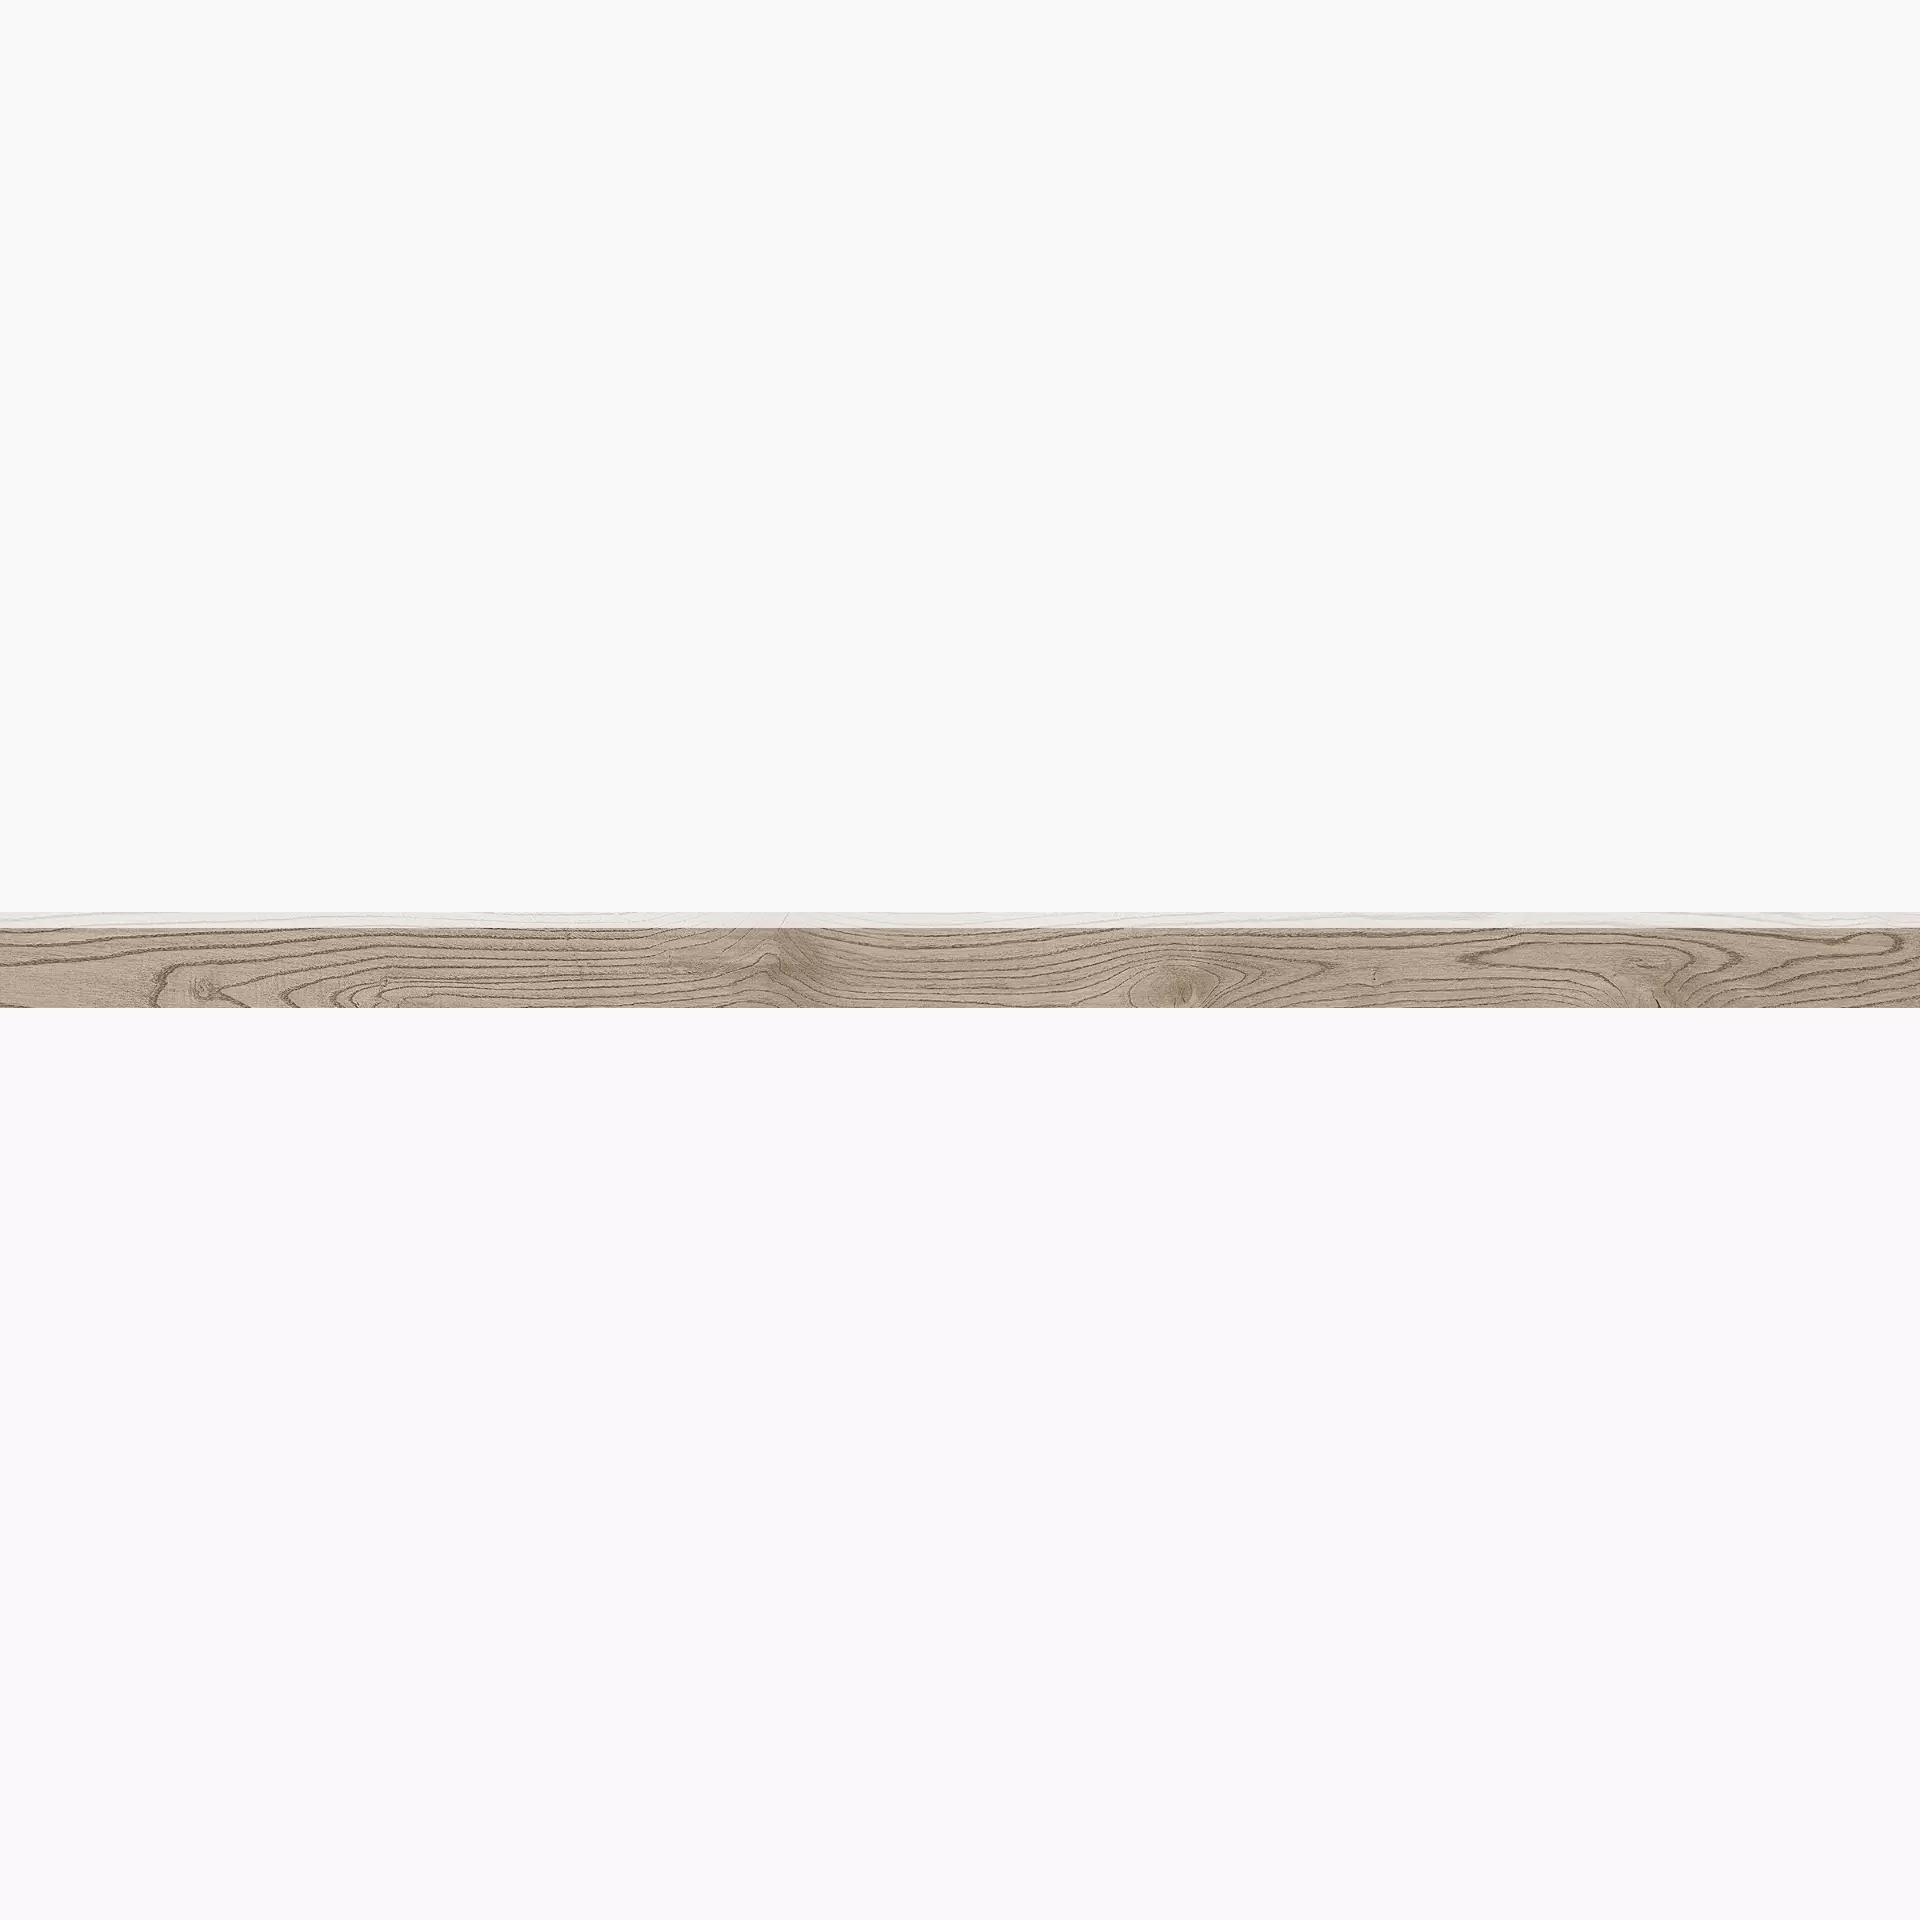 Gardenia Orchidea Just Code Sand Naturale Skirting board GML75020 6x120cm rectified 8,5mm